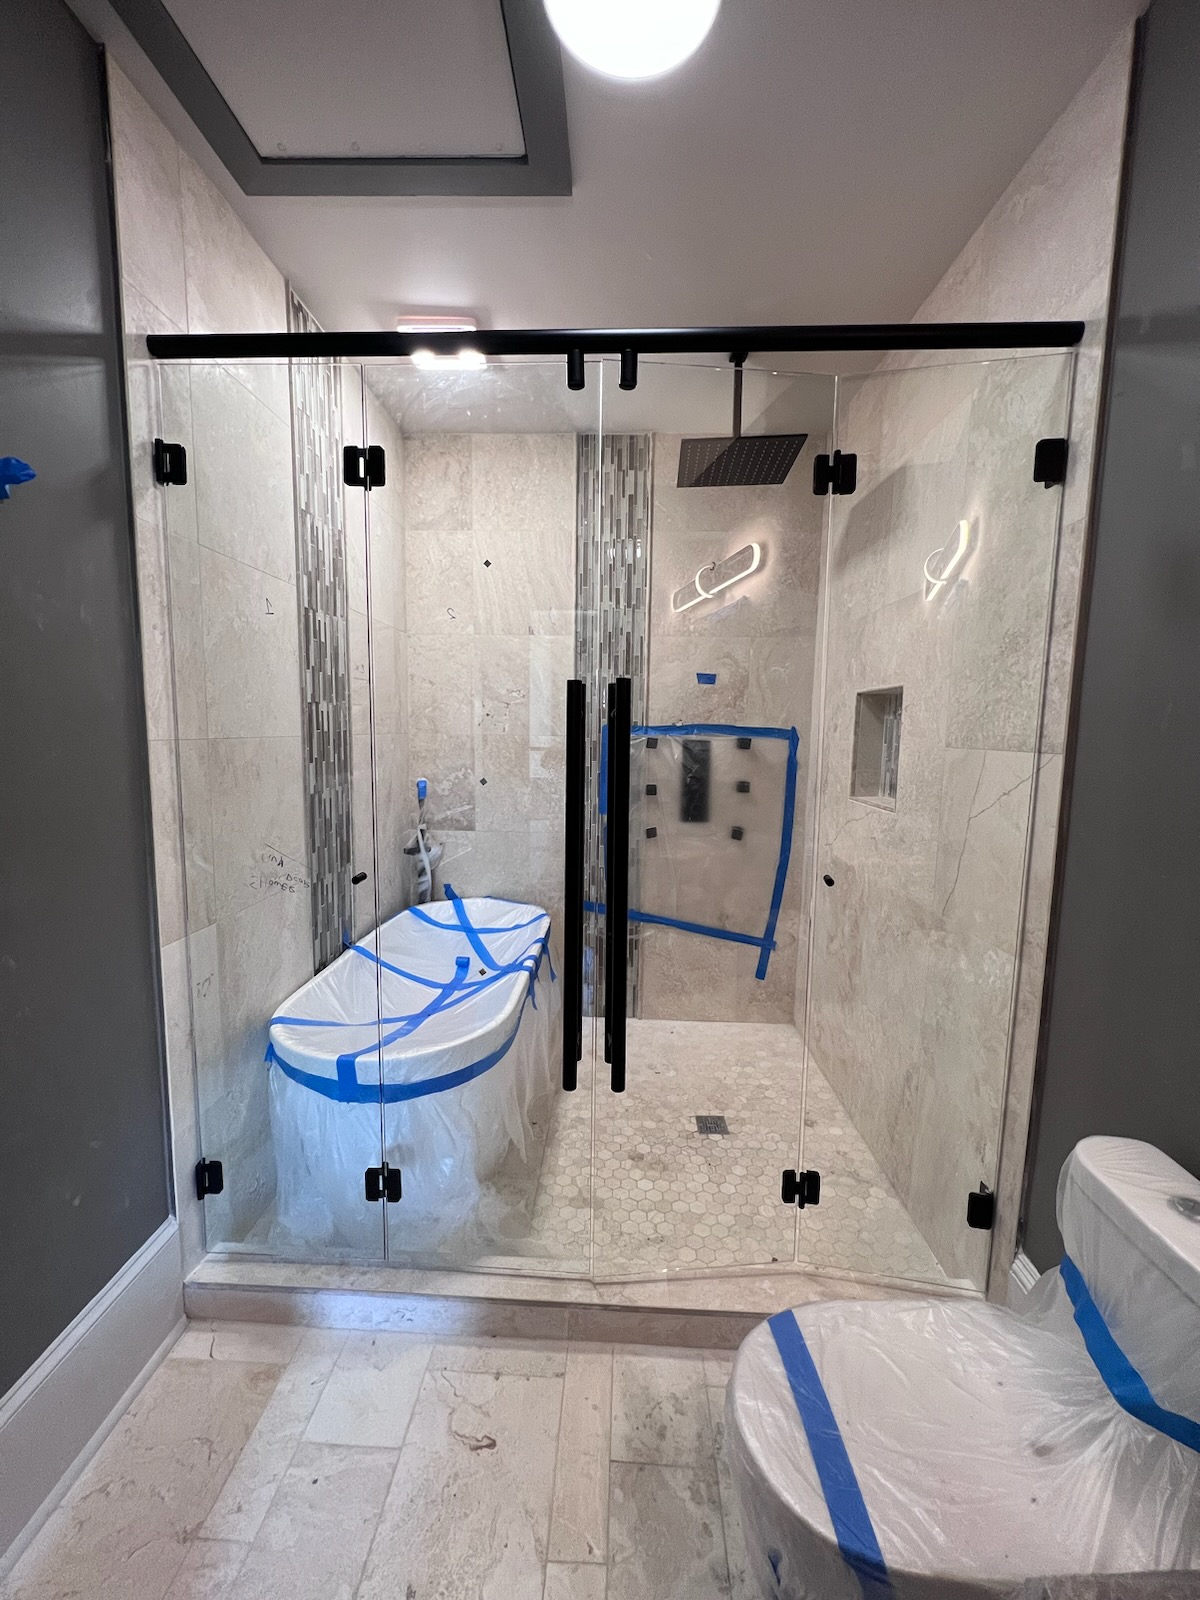 This Hydroslide / Pacifica double sliding bi-fold enclosure allows this homeowner to maximize their shower opening while preventing the doors from hitting the tub on the left or the toilet on the right. 